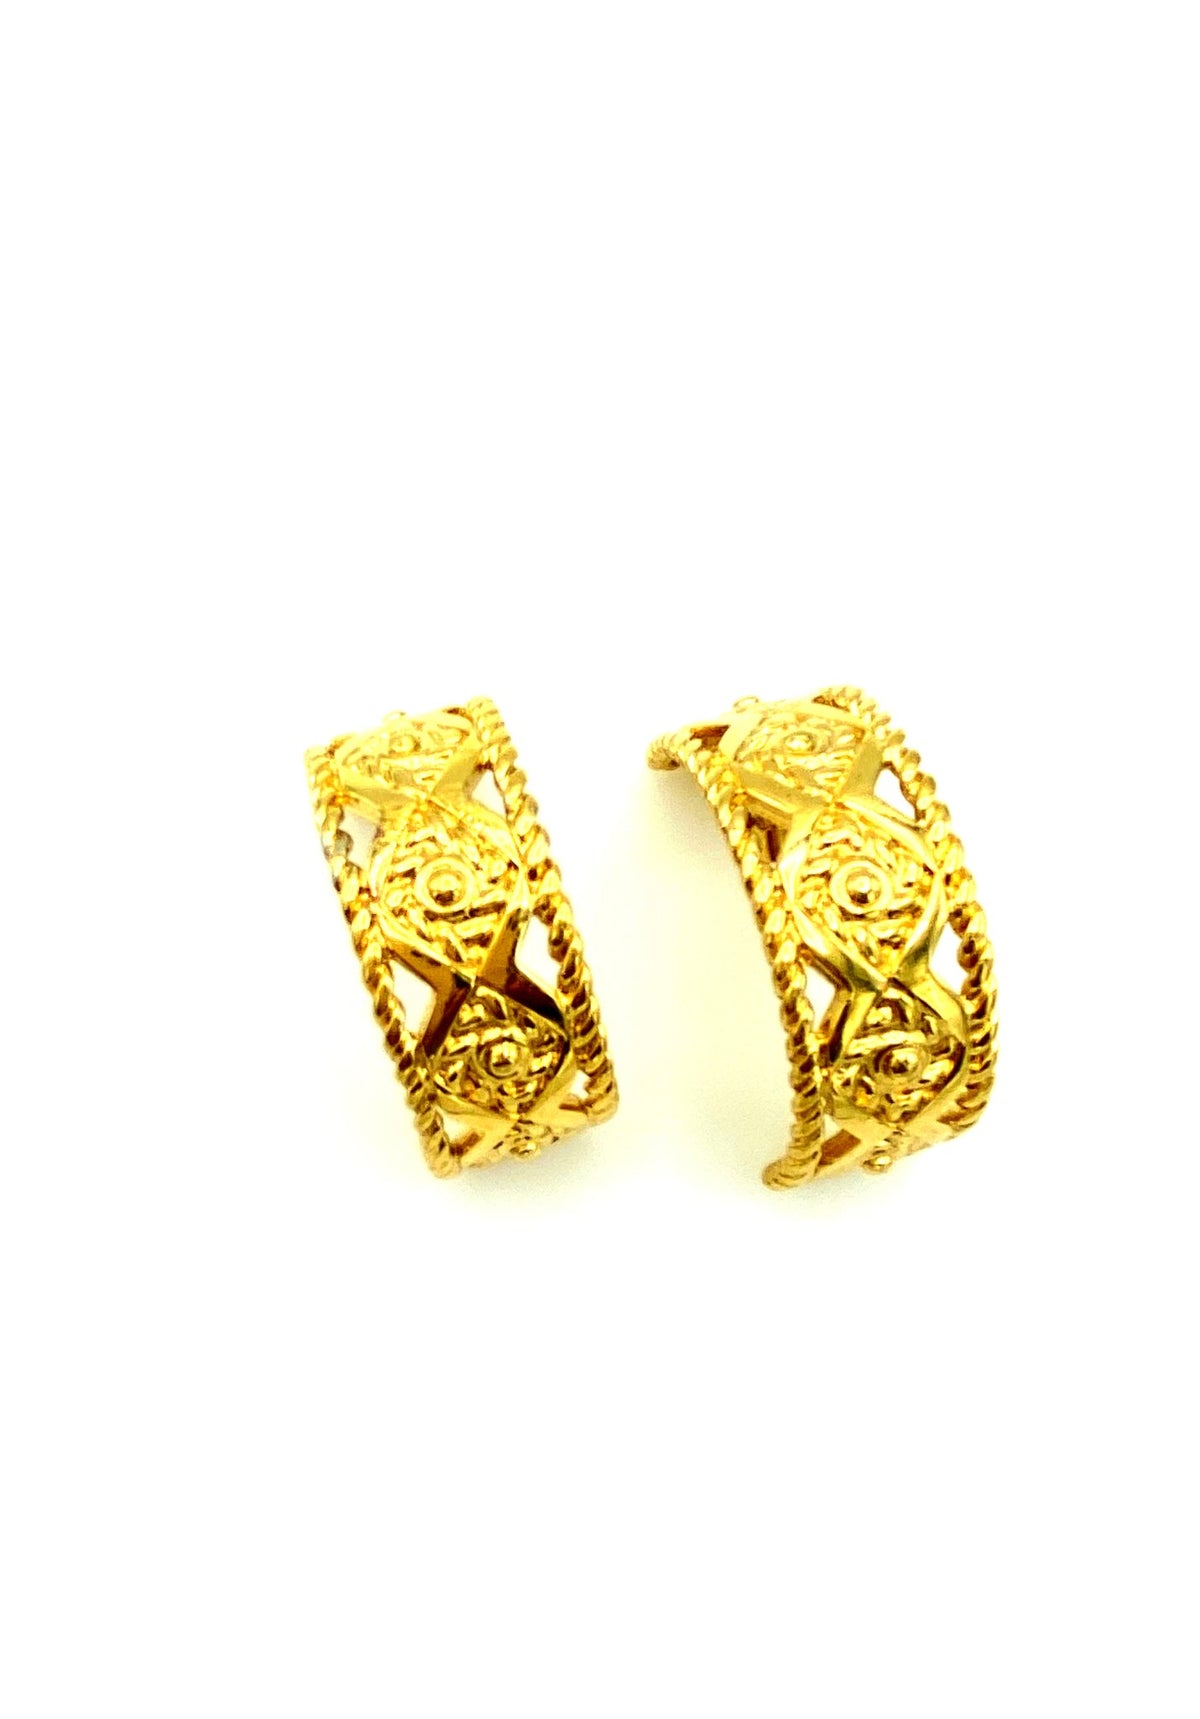 Givenchy Gold Geometric Half Hoop Vintage Clip-On Earrings - 24 Wishes Vintage Jewelry